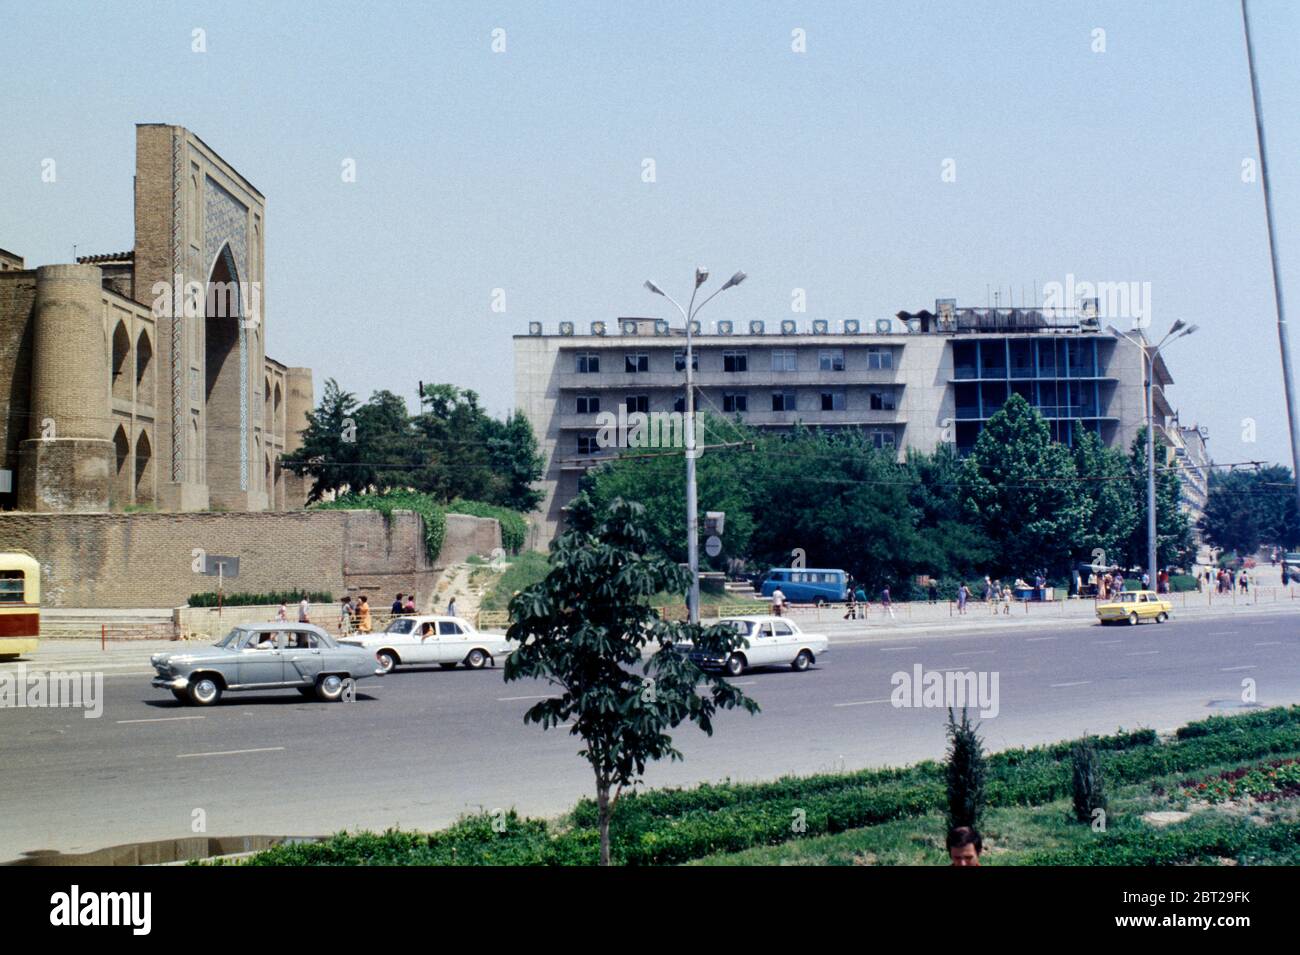 Baku, the capital city of Azerbaijan, and the entrance to the old city Icherisheher pictured in 1983 Stock Photo